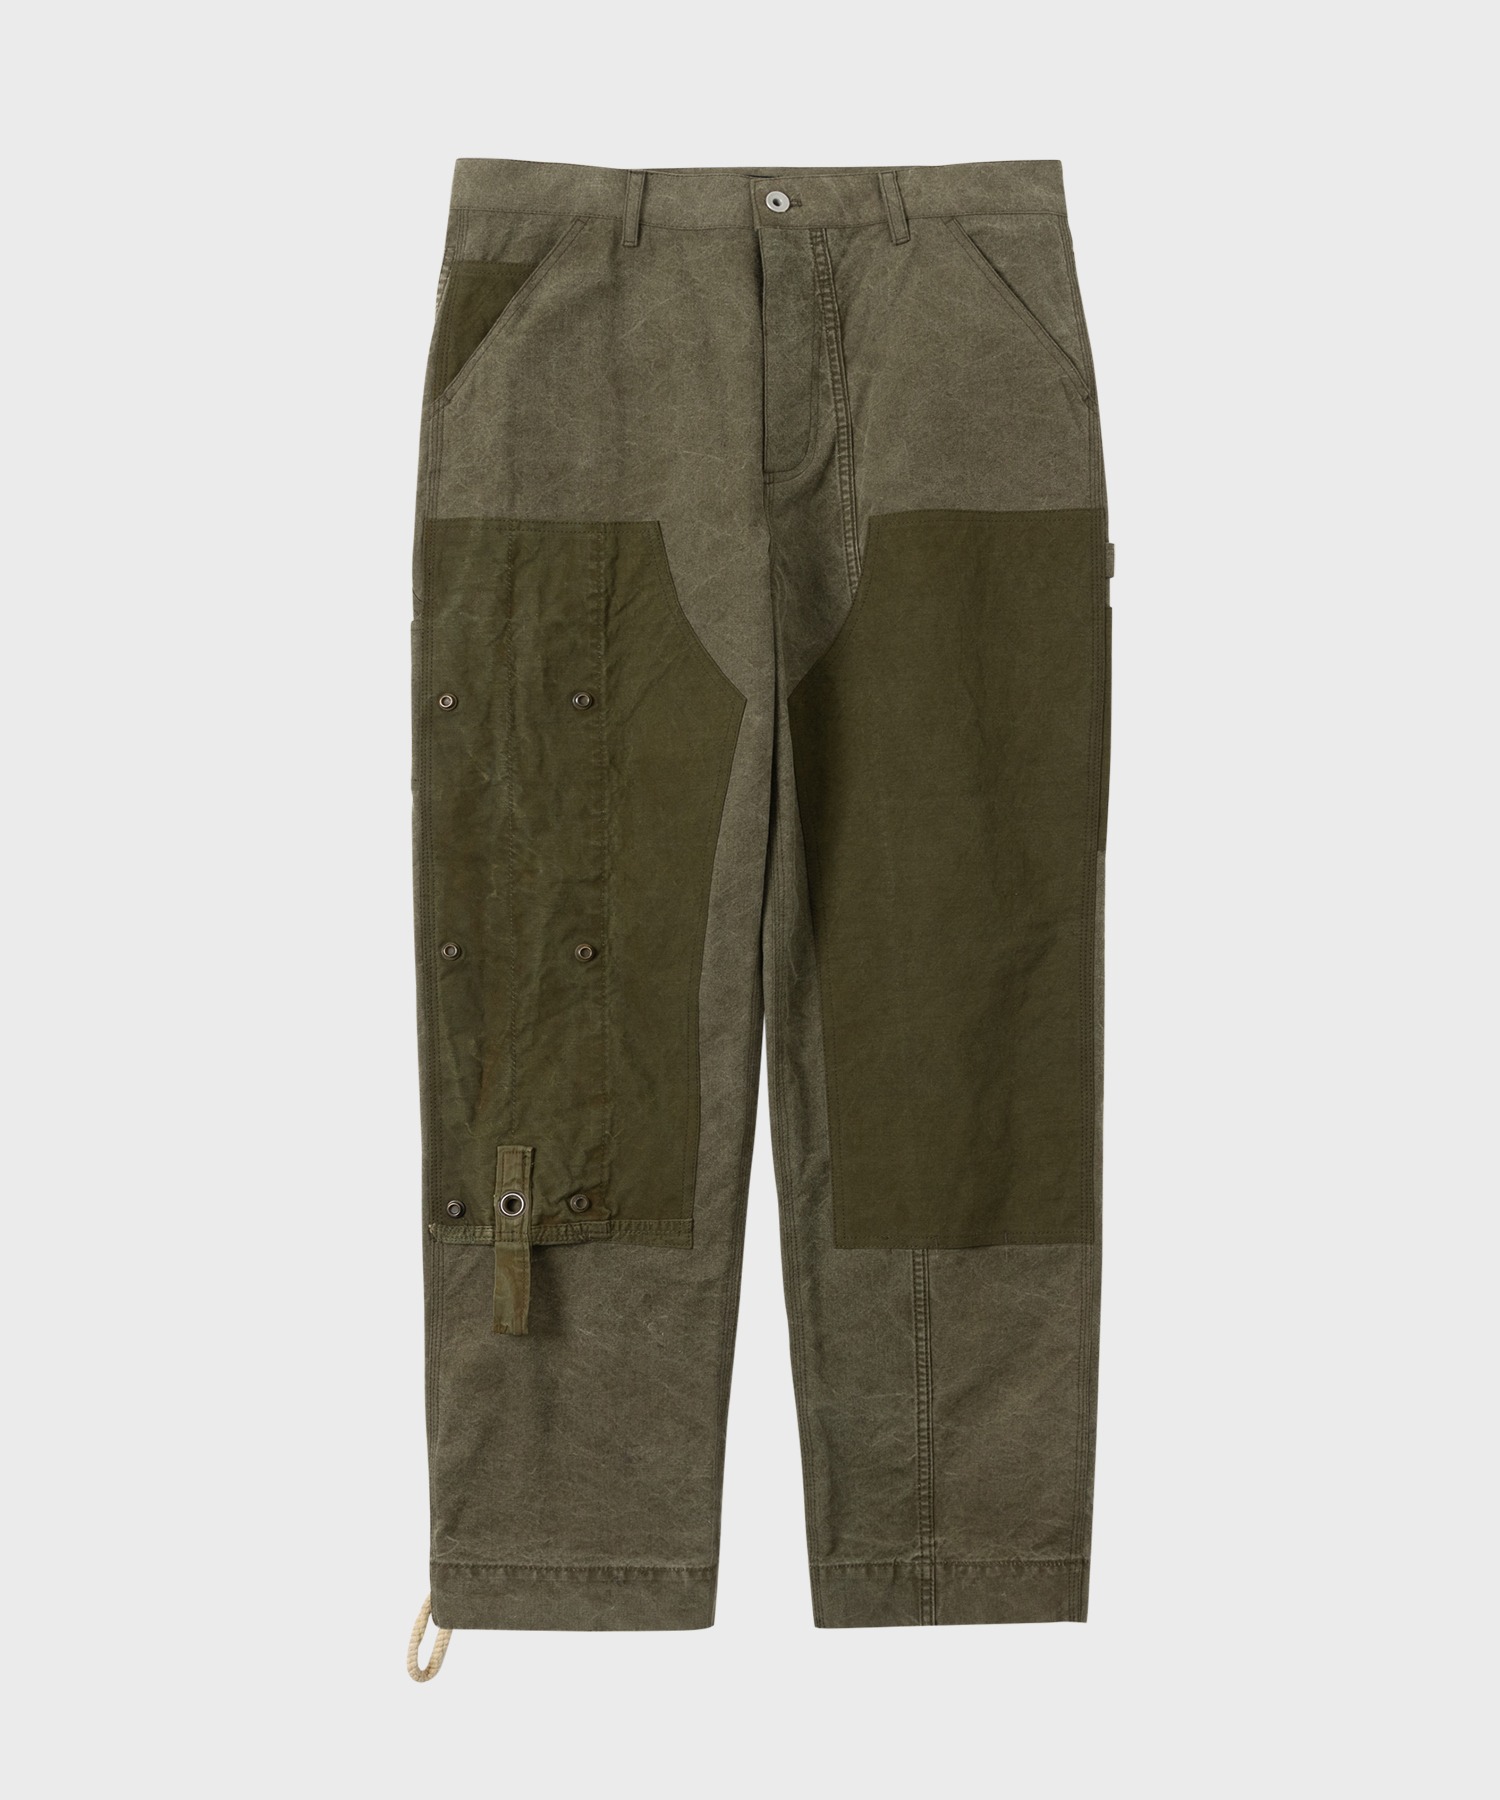 DOUBLE KNEE CARPENTER PANTS (OLIVE DRAB) / UPCYCLED